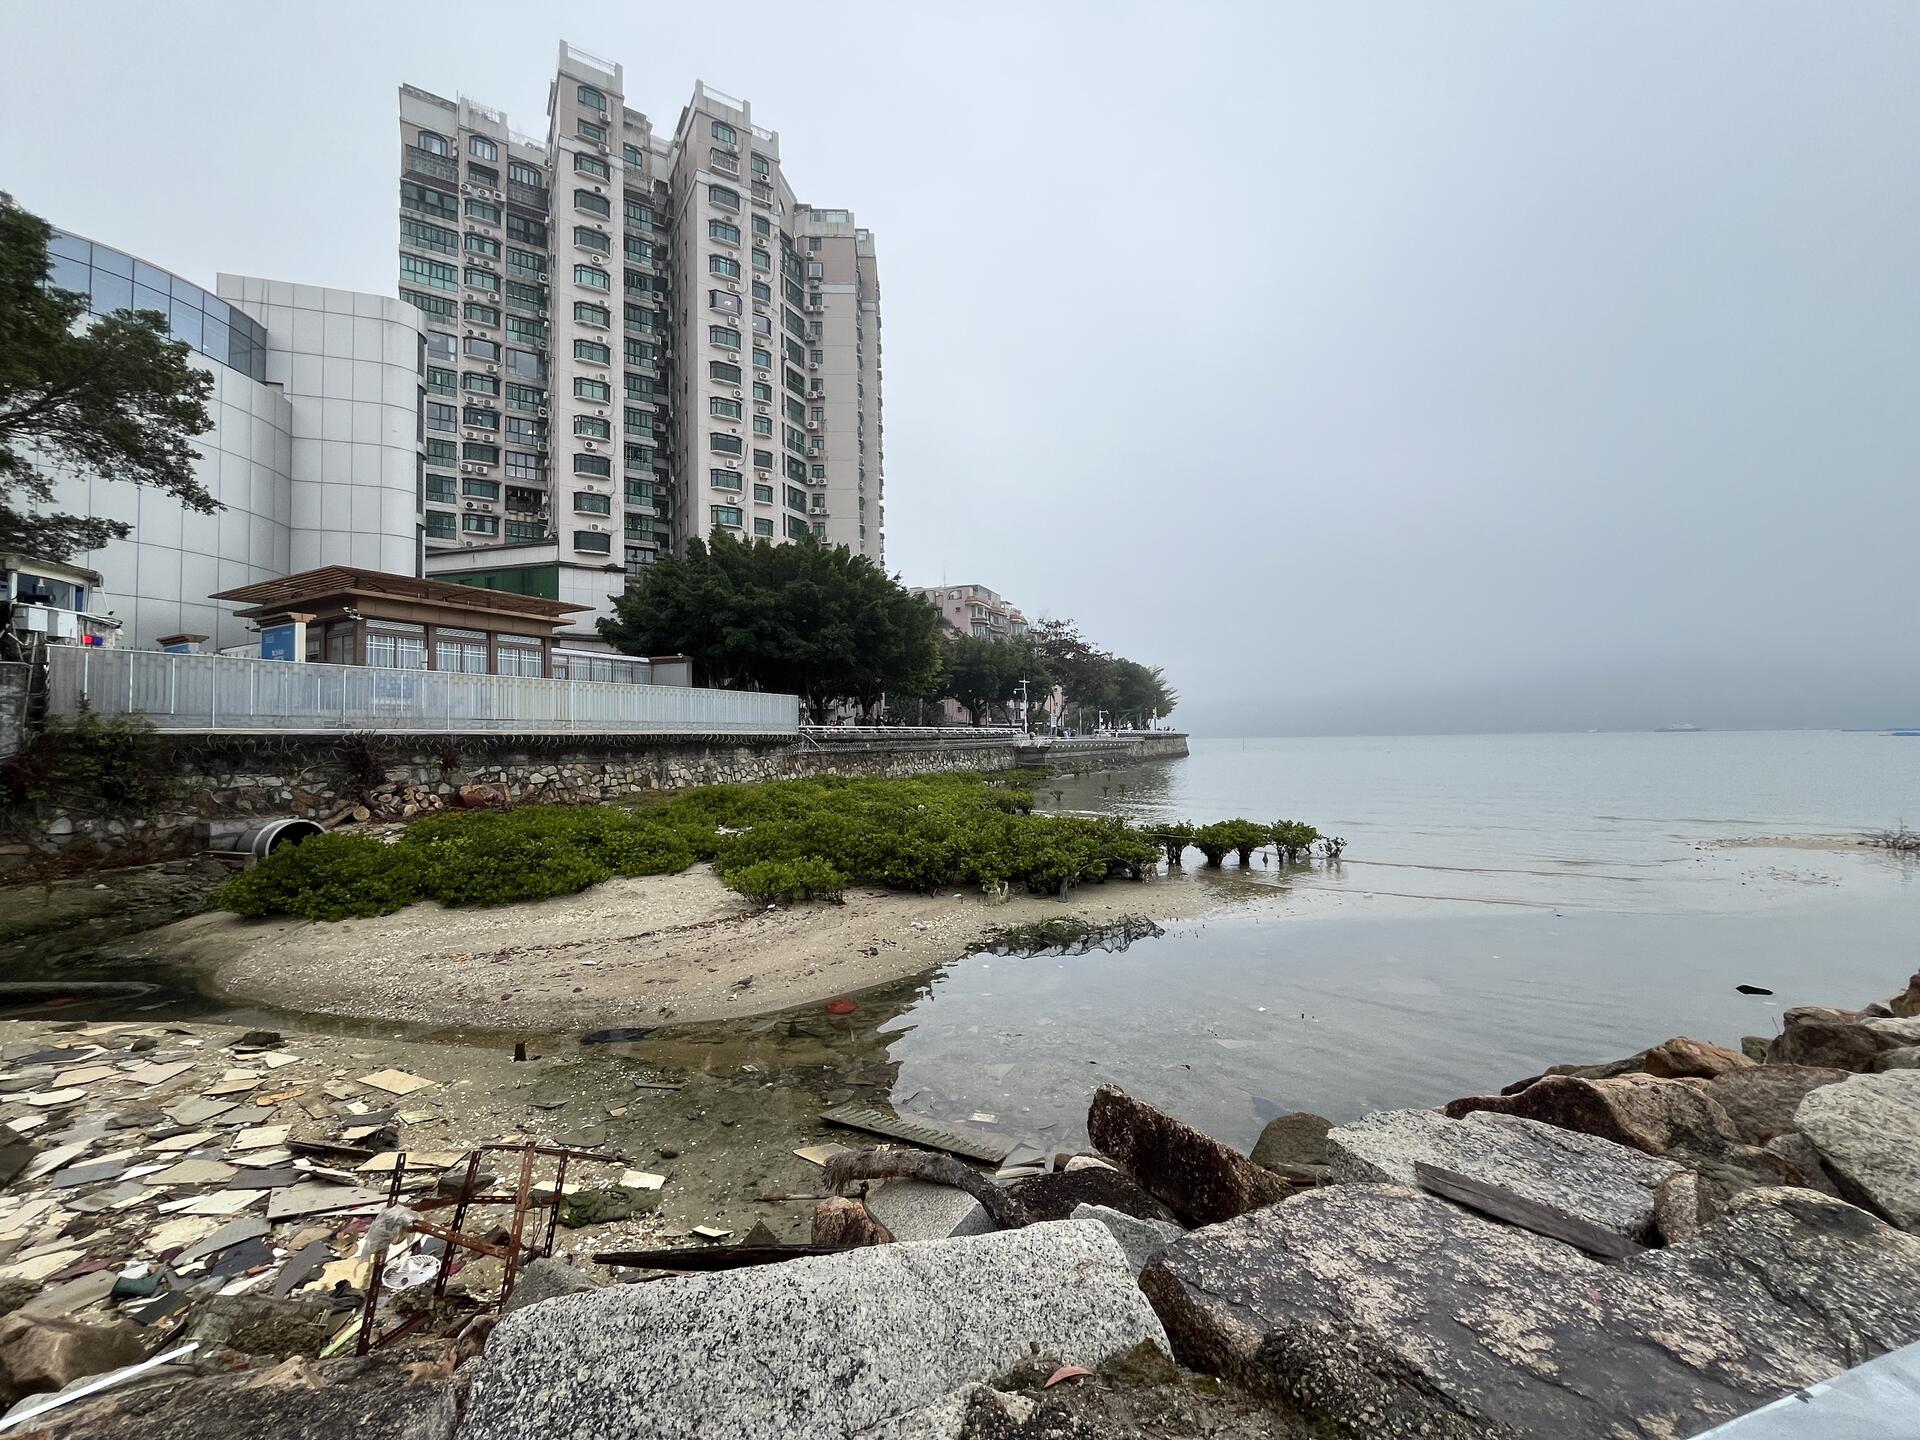 Estuary, opposite in the near distance is the Sha Tau Kok Museum on the Shenzhen side